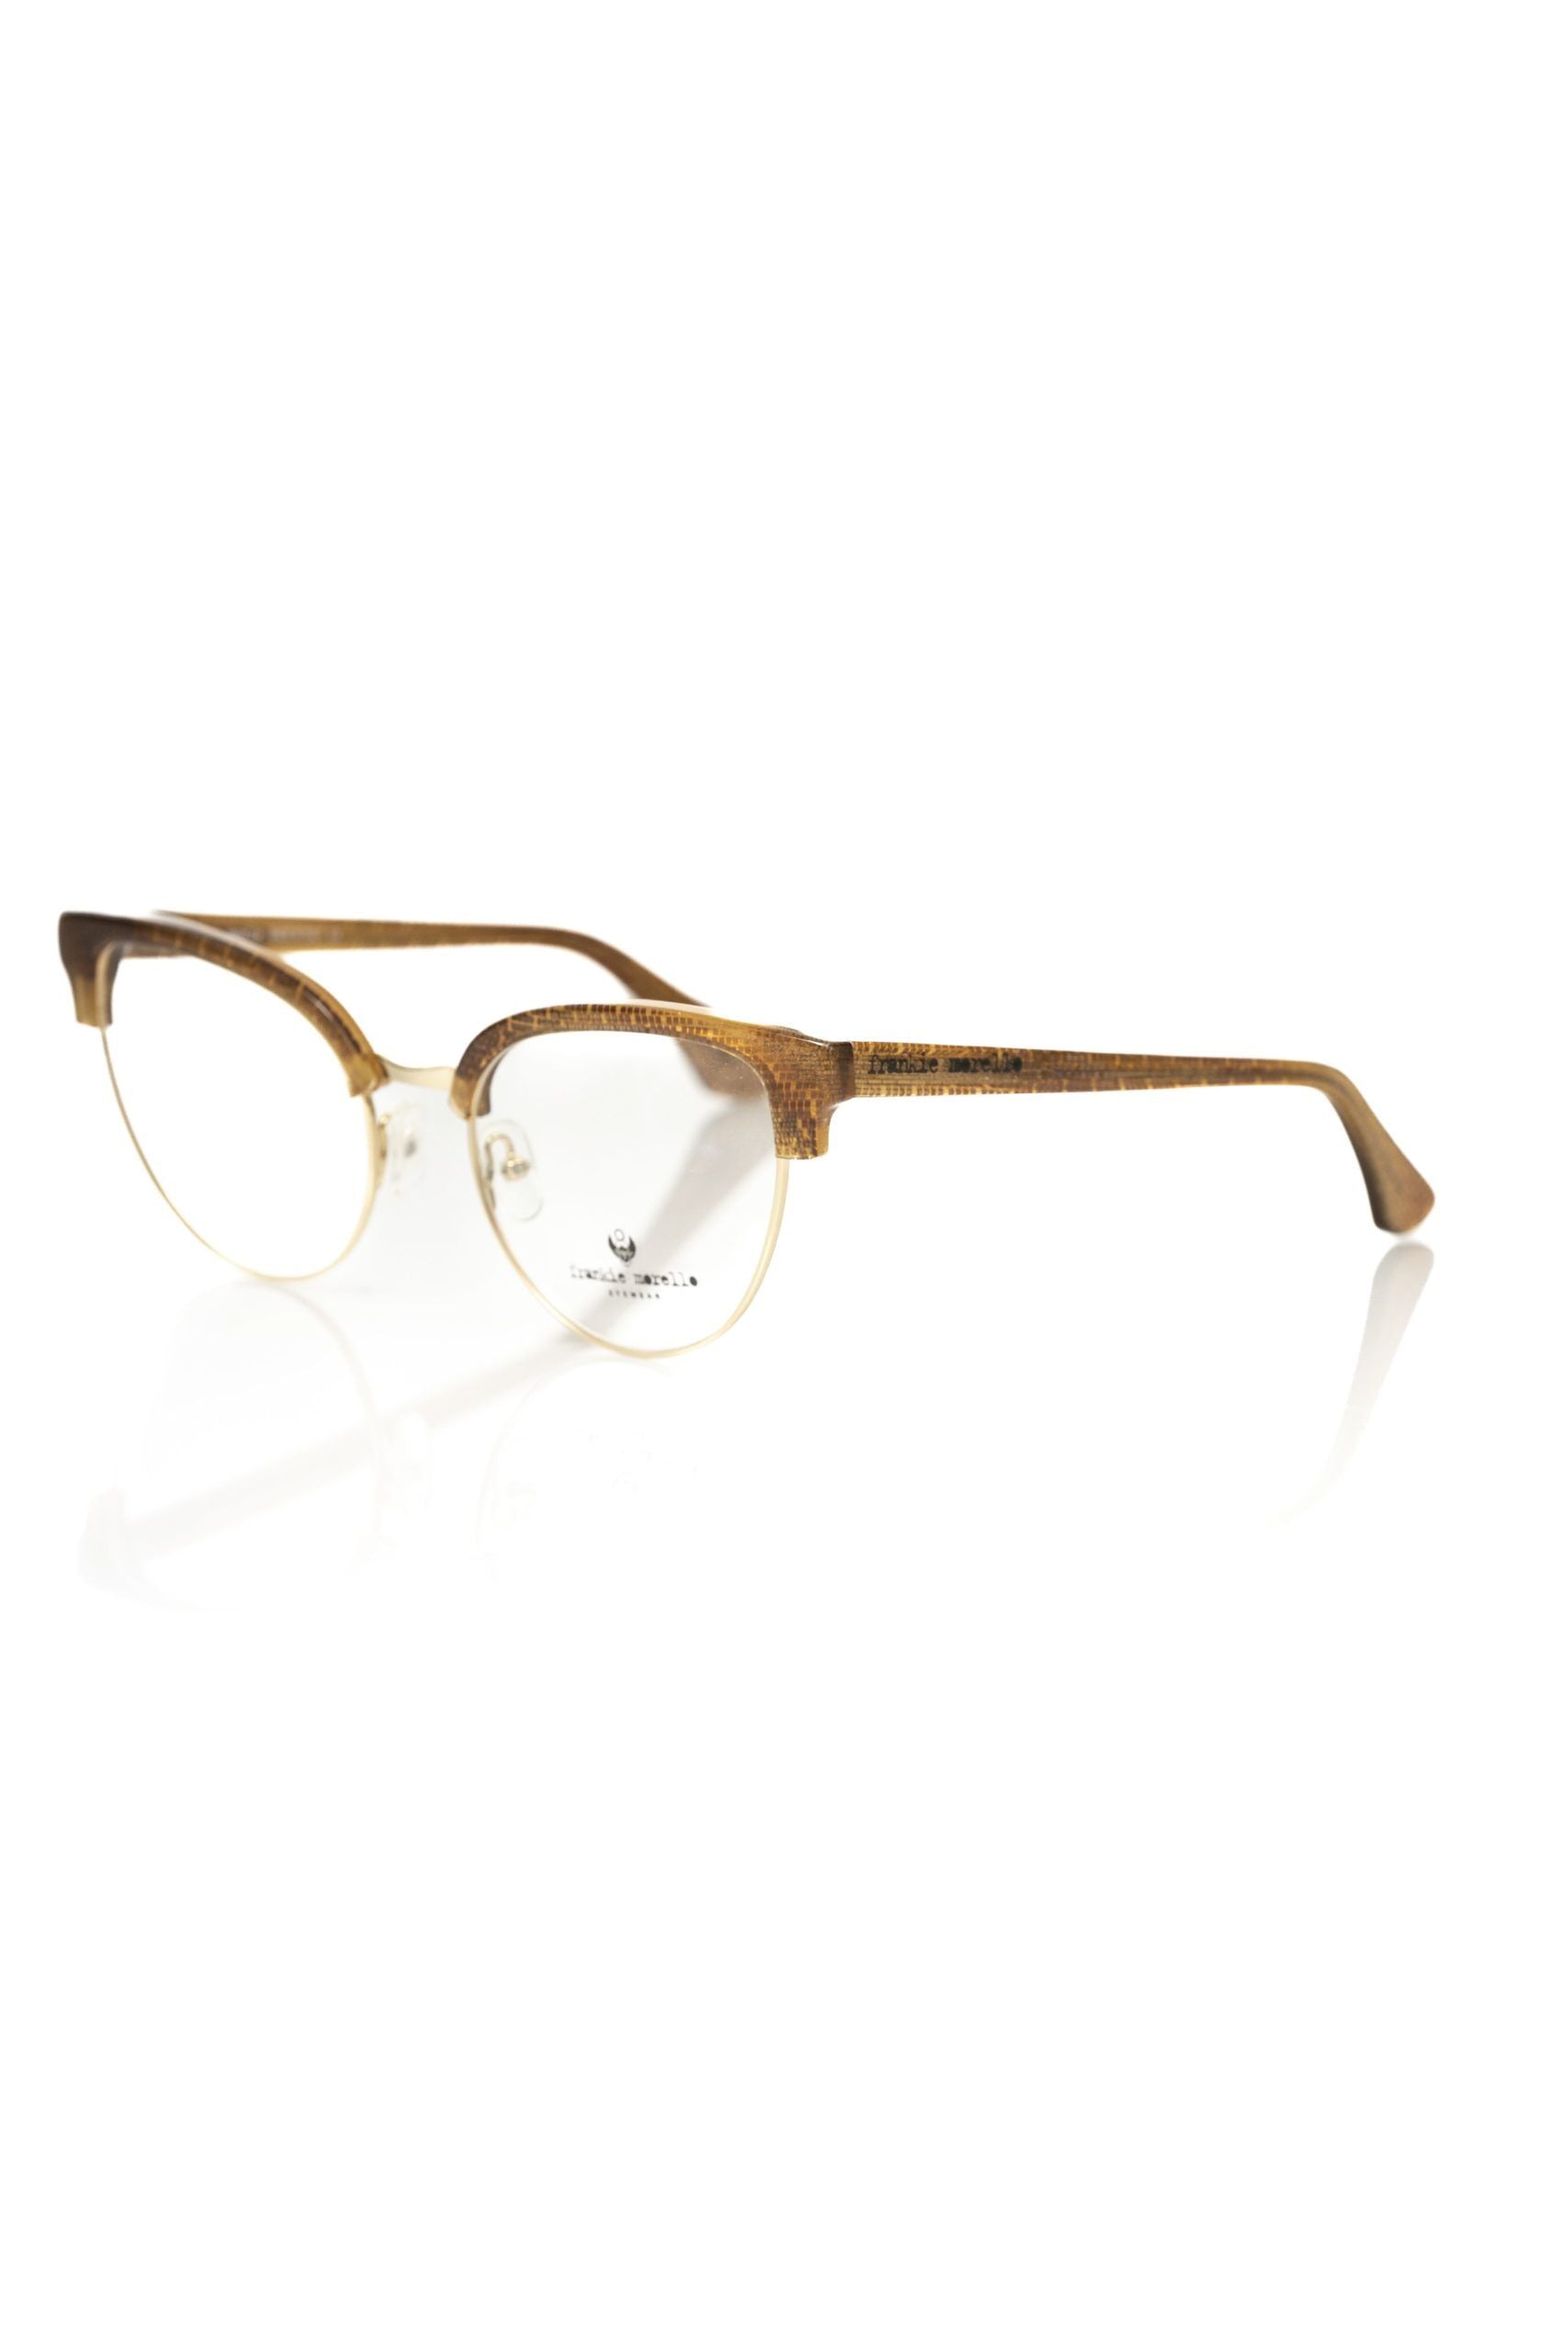 Frankie Morello FRMO-22110 Brown Metallic Fibre Frames - Designed by Frankie Morello Available to Buy at a Discounted Price on Moon Behind The Hill Online Designer Discount Store